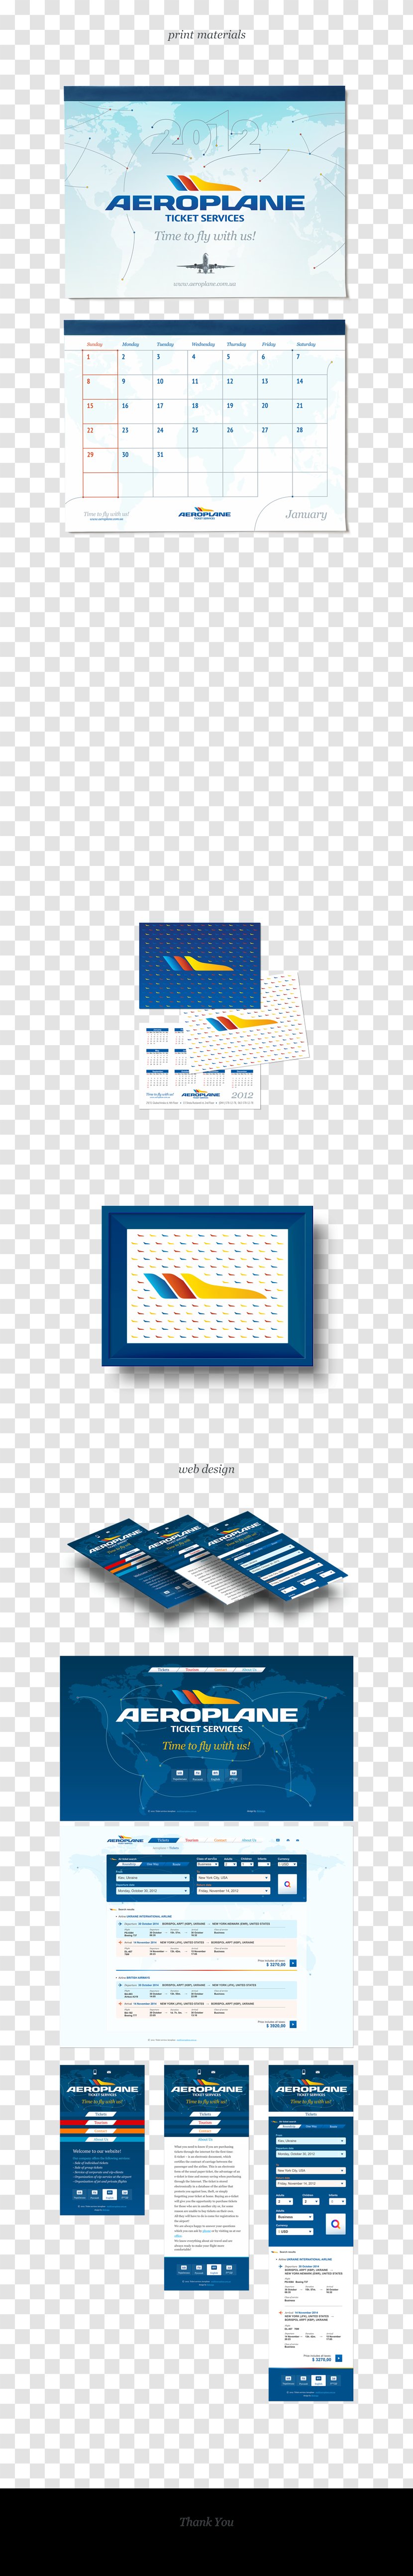 Airplane Airline Ticket Service Brand - Corporate Identity Transparent PNG